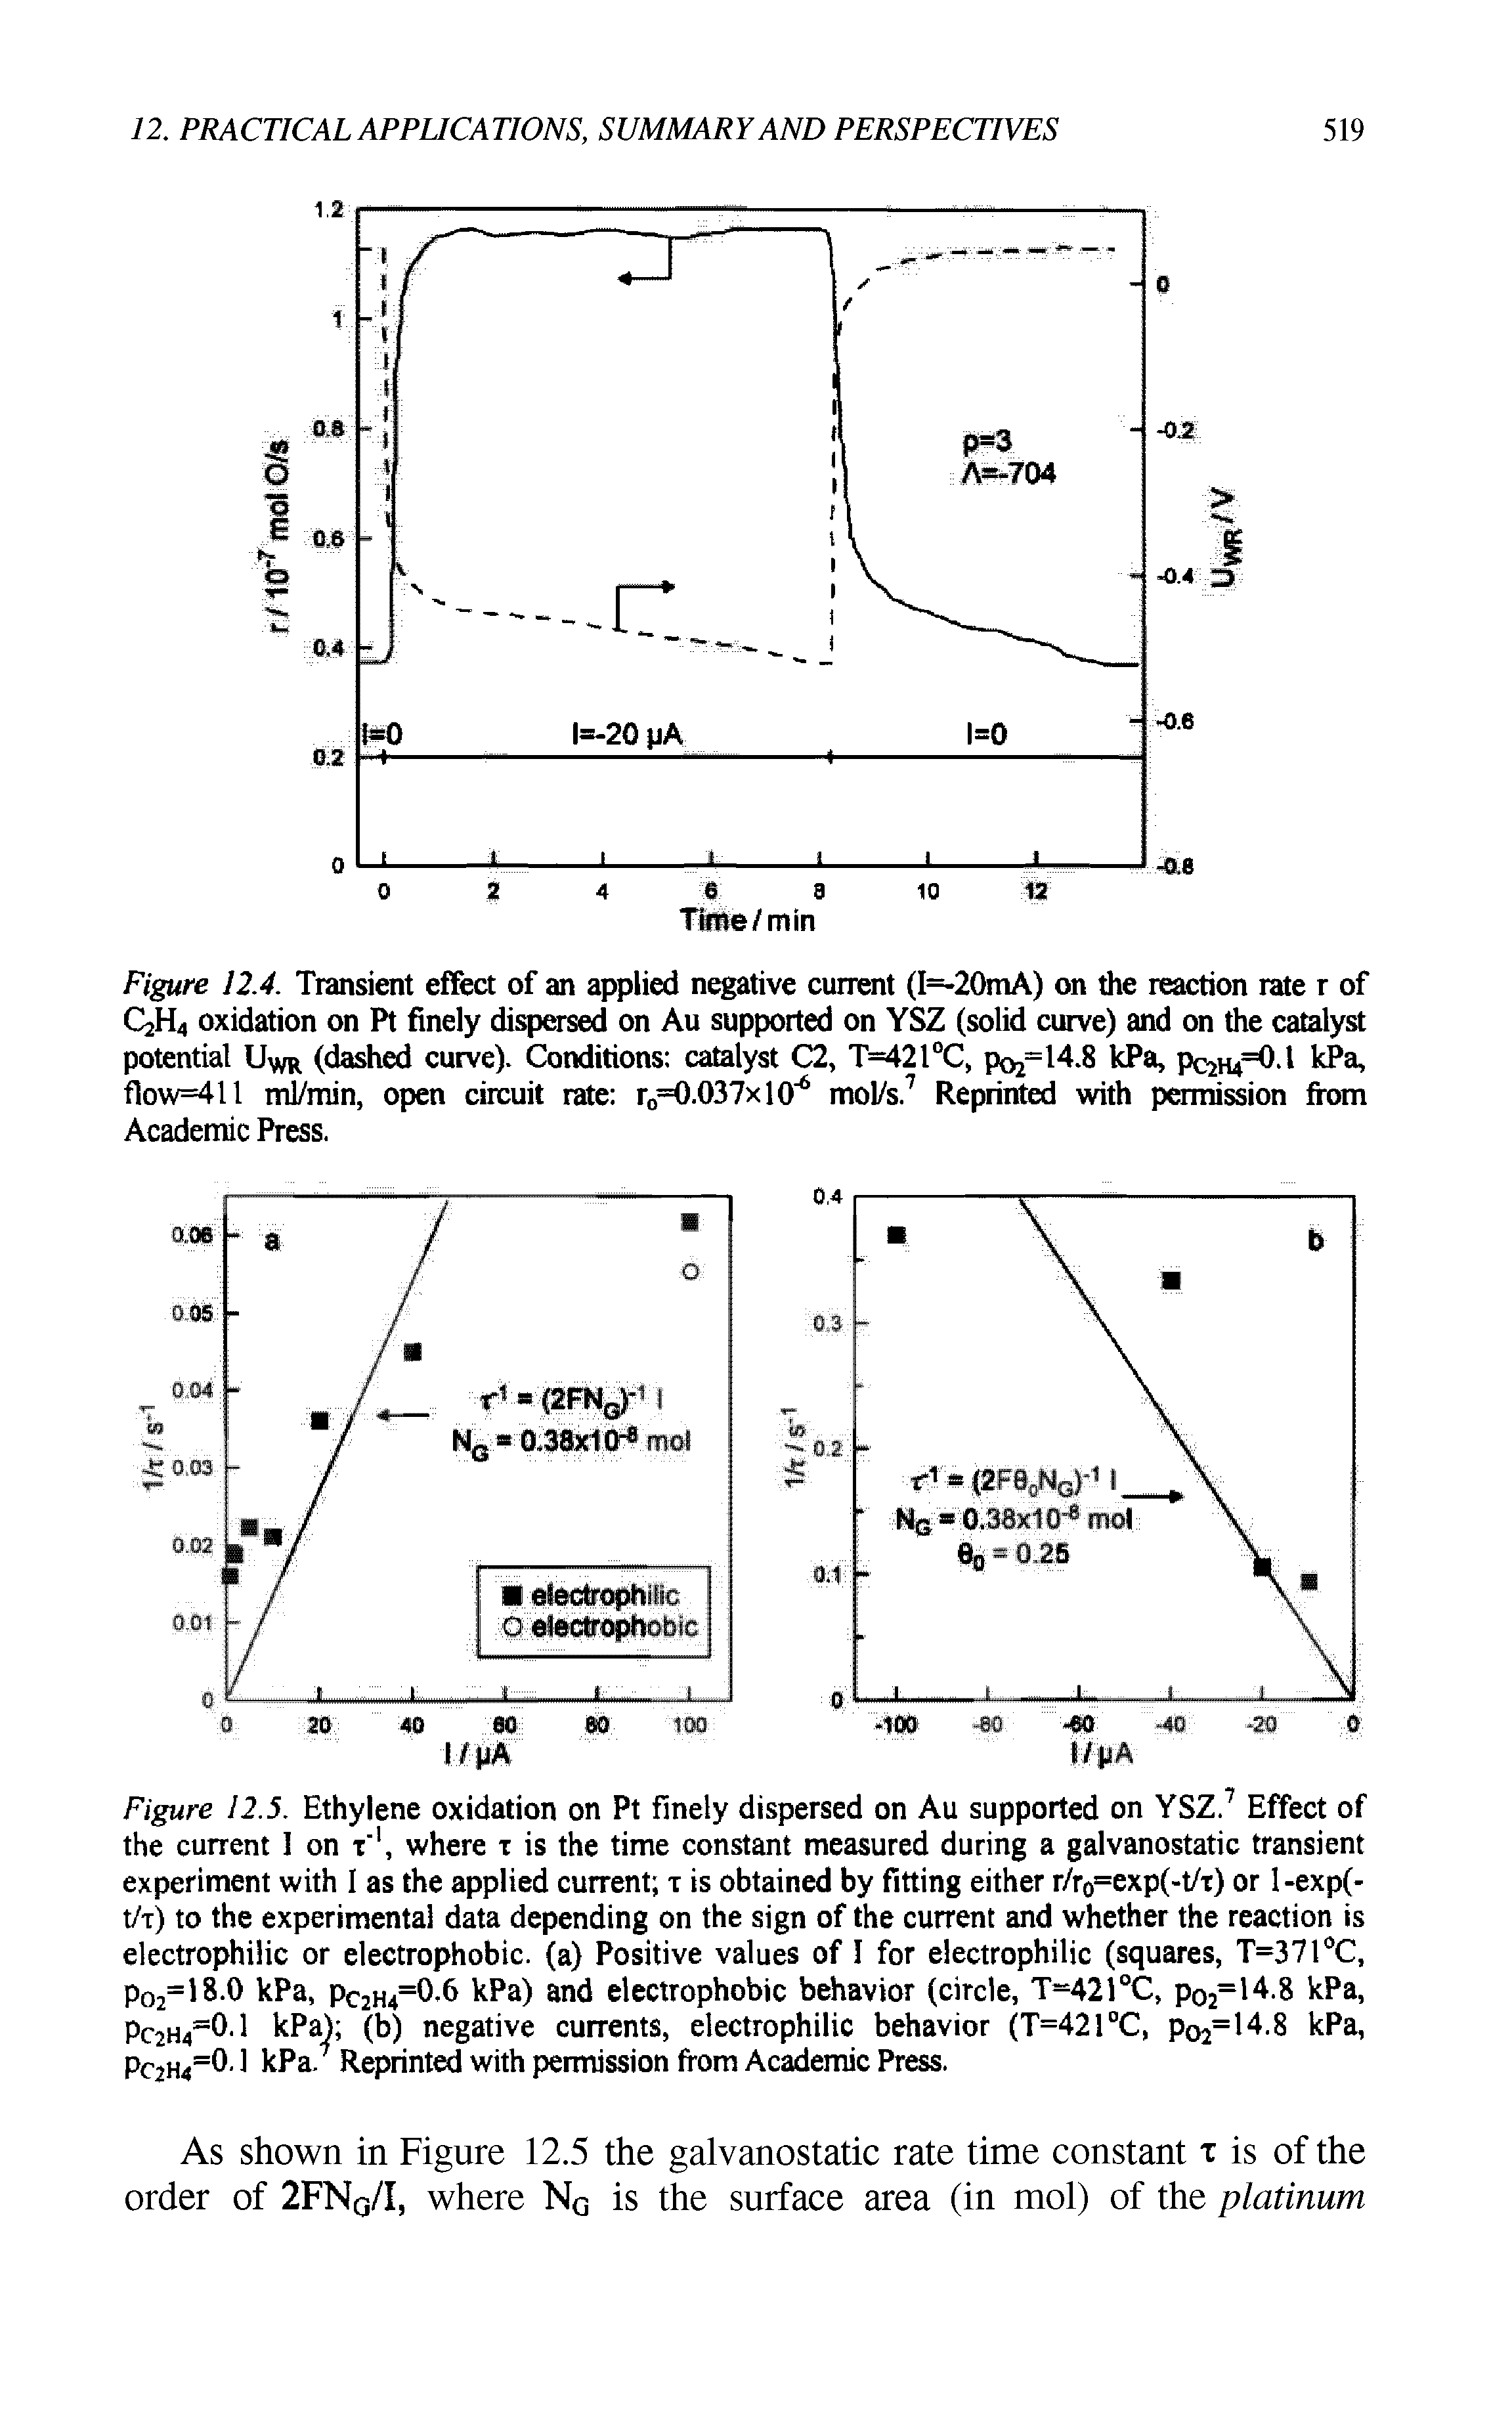 Figure 12.5. Ethylene oxidation on Pt finely dispersed on Au supported on YSZ.7 Effect of the current 1 on x 1, where x is the time constant measured during a galvanostatic transient experiment with I as the applied current x is obtained by fitting either r/r0=exp(-t/x) or l-exp(-t/x) to the experimental data depending on the sign of the current and whether the reaction is electrophilic or electrophobic, (a) Positive values of I for electrophilic (squares, T=371°C, pO2=18.0 kPa, Pc2H4=0-6 kPa) and electrophobic behavior (circle, T=421°C, p02=l 4.8 kPa, Pc2H4 CU kPa) (b) negative currents, electrophilic behavior (T=421°C, p02=14.8 kPa, pC2H4=0.1 kPa. Reprints with permission from Academic Press.